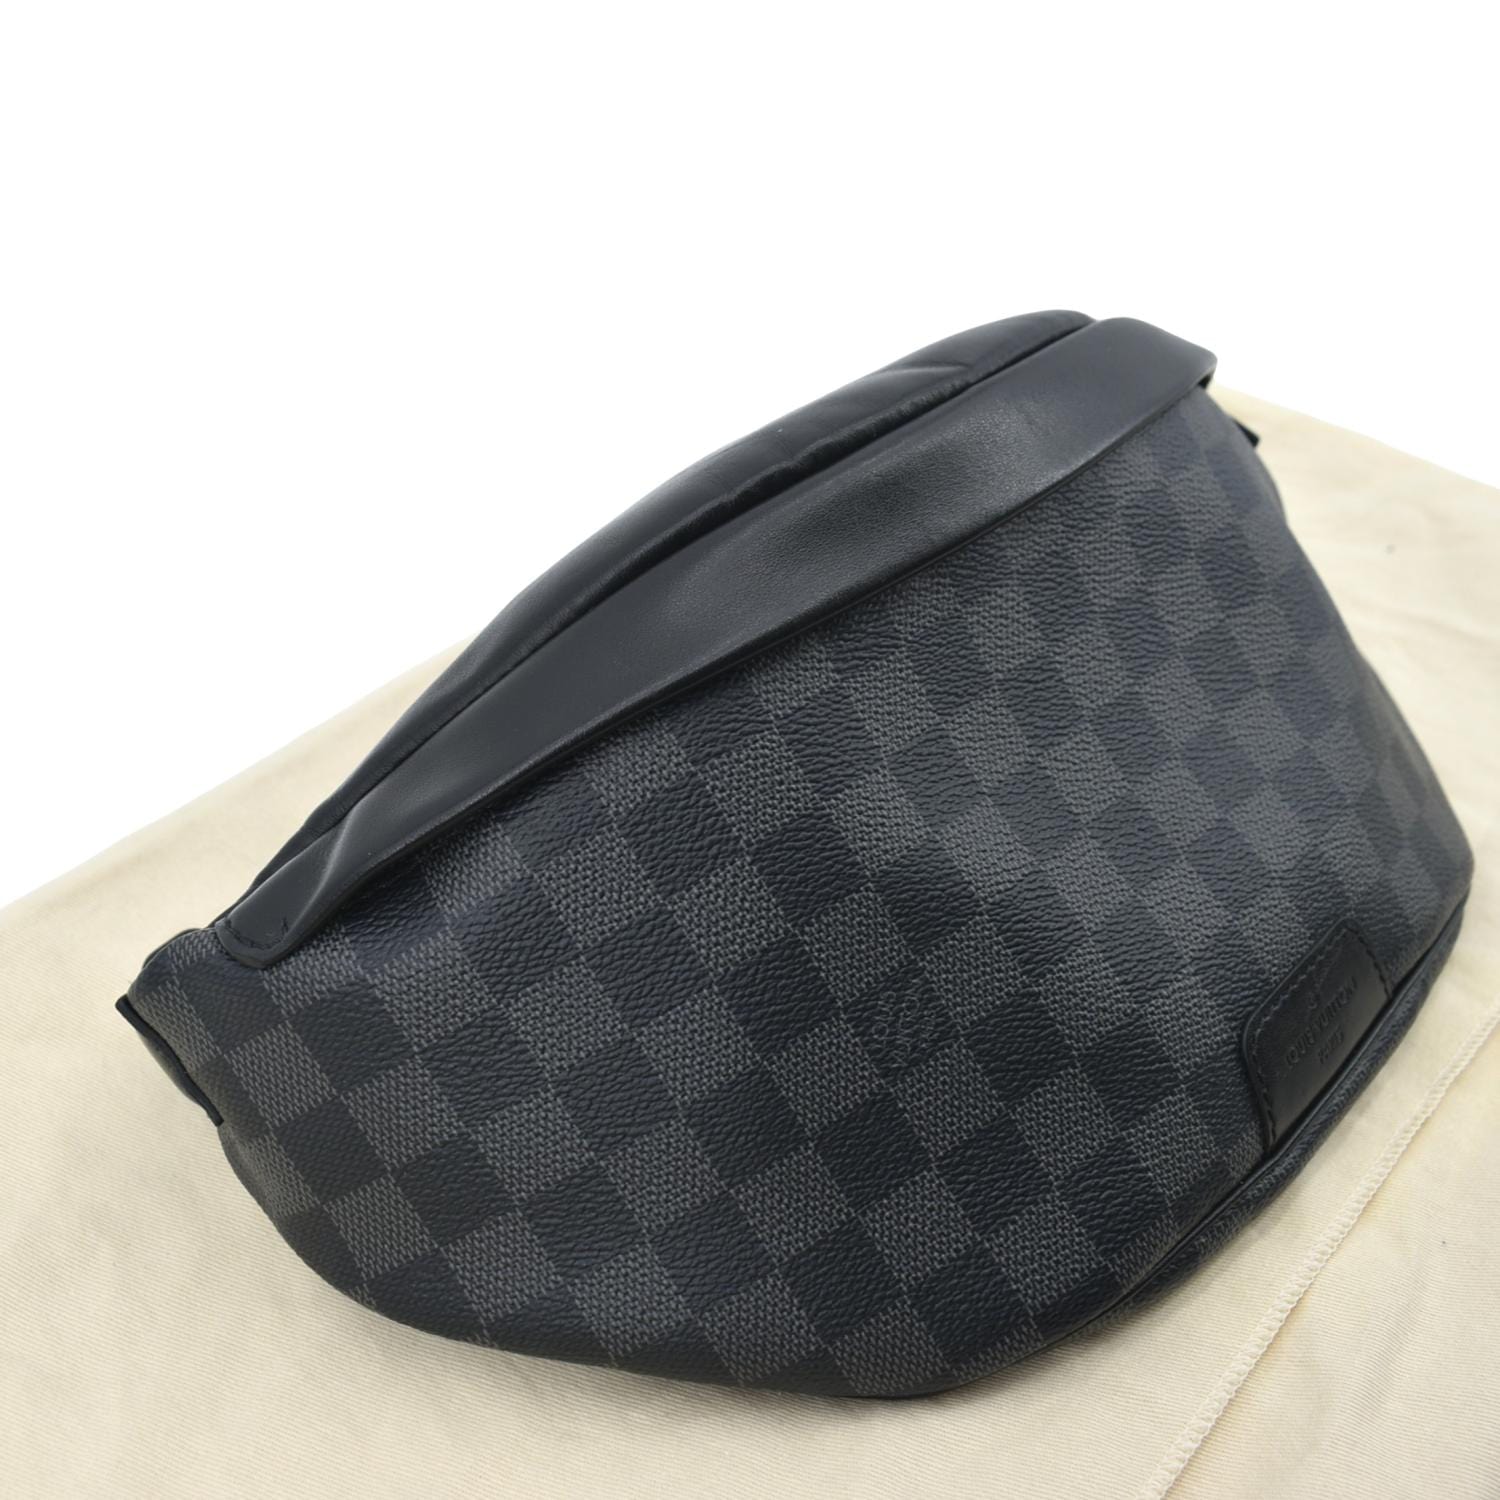 Shop Louis Vuitton Discovery Discovery bumbag (M44336) by 紬tumugi